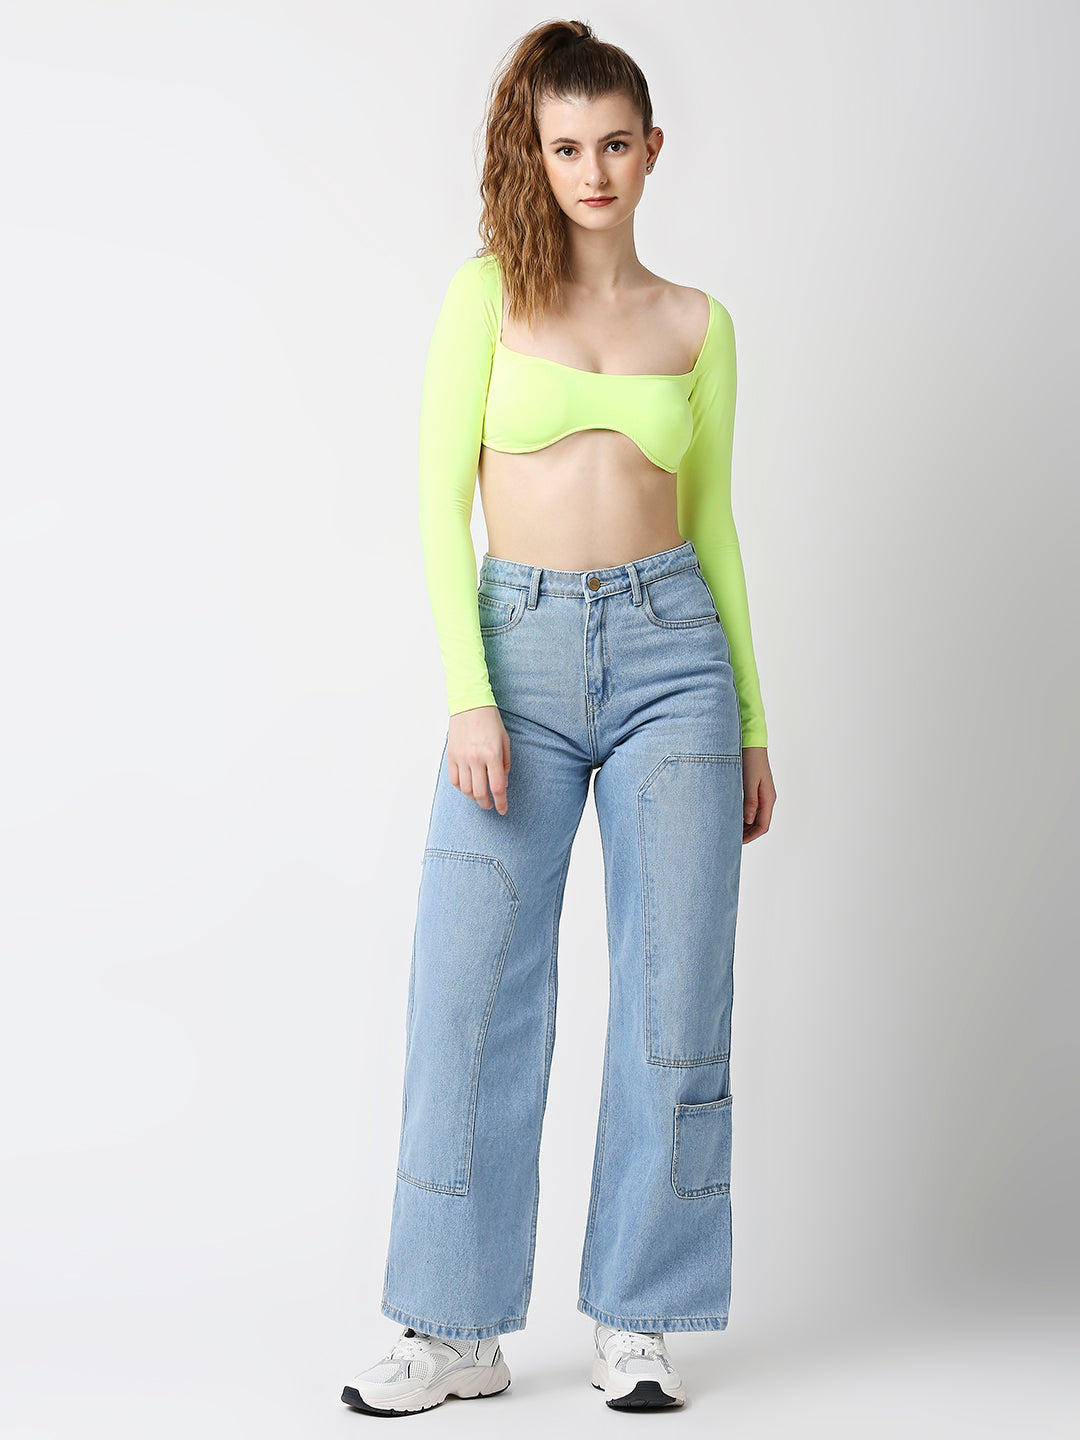 Disrupt Women Neon Green Wide Square Neck Slim Fit Padded Super Crop Top